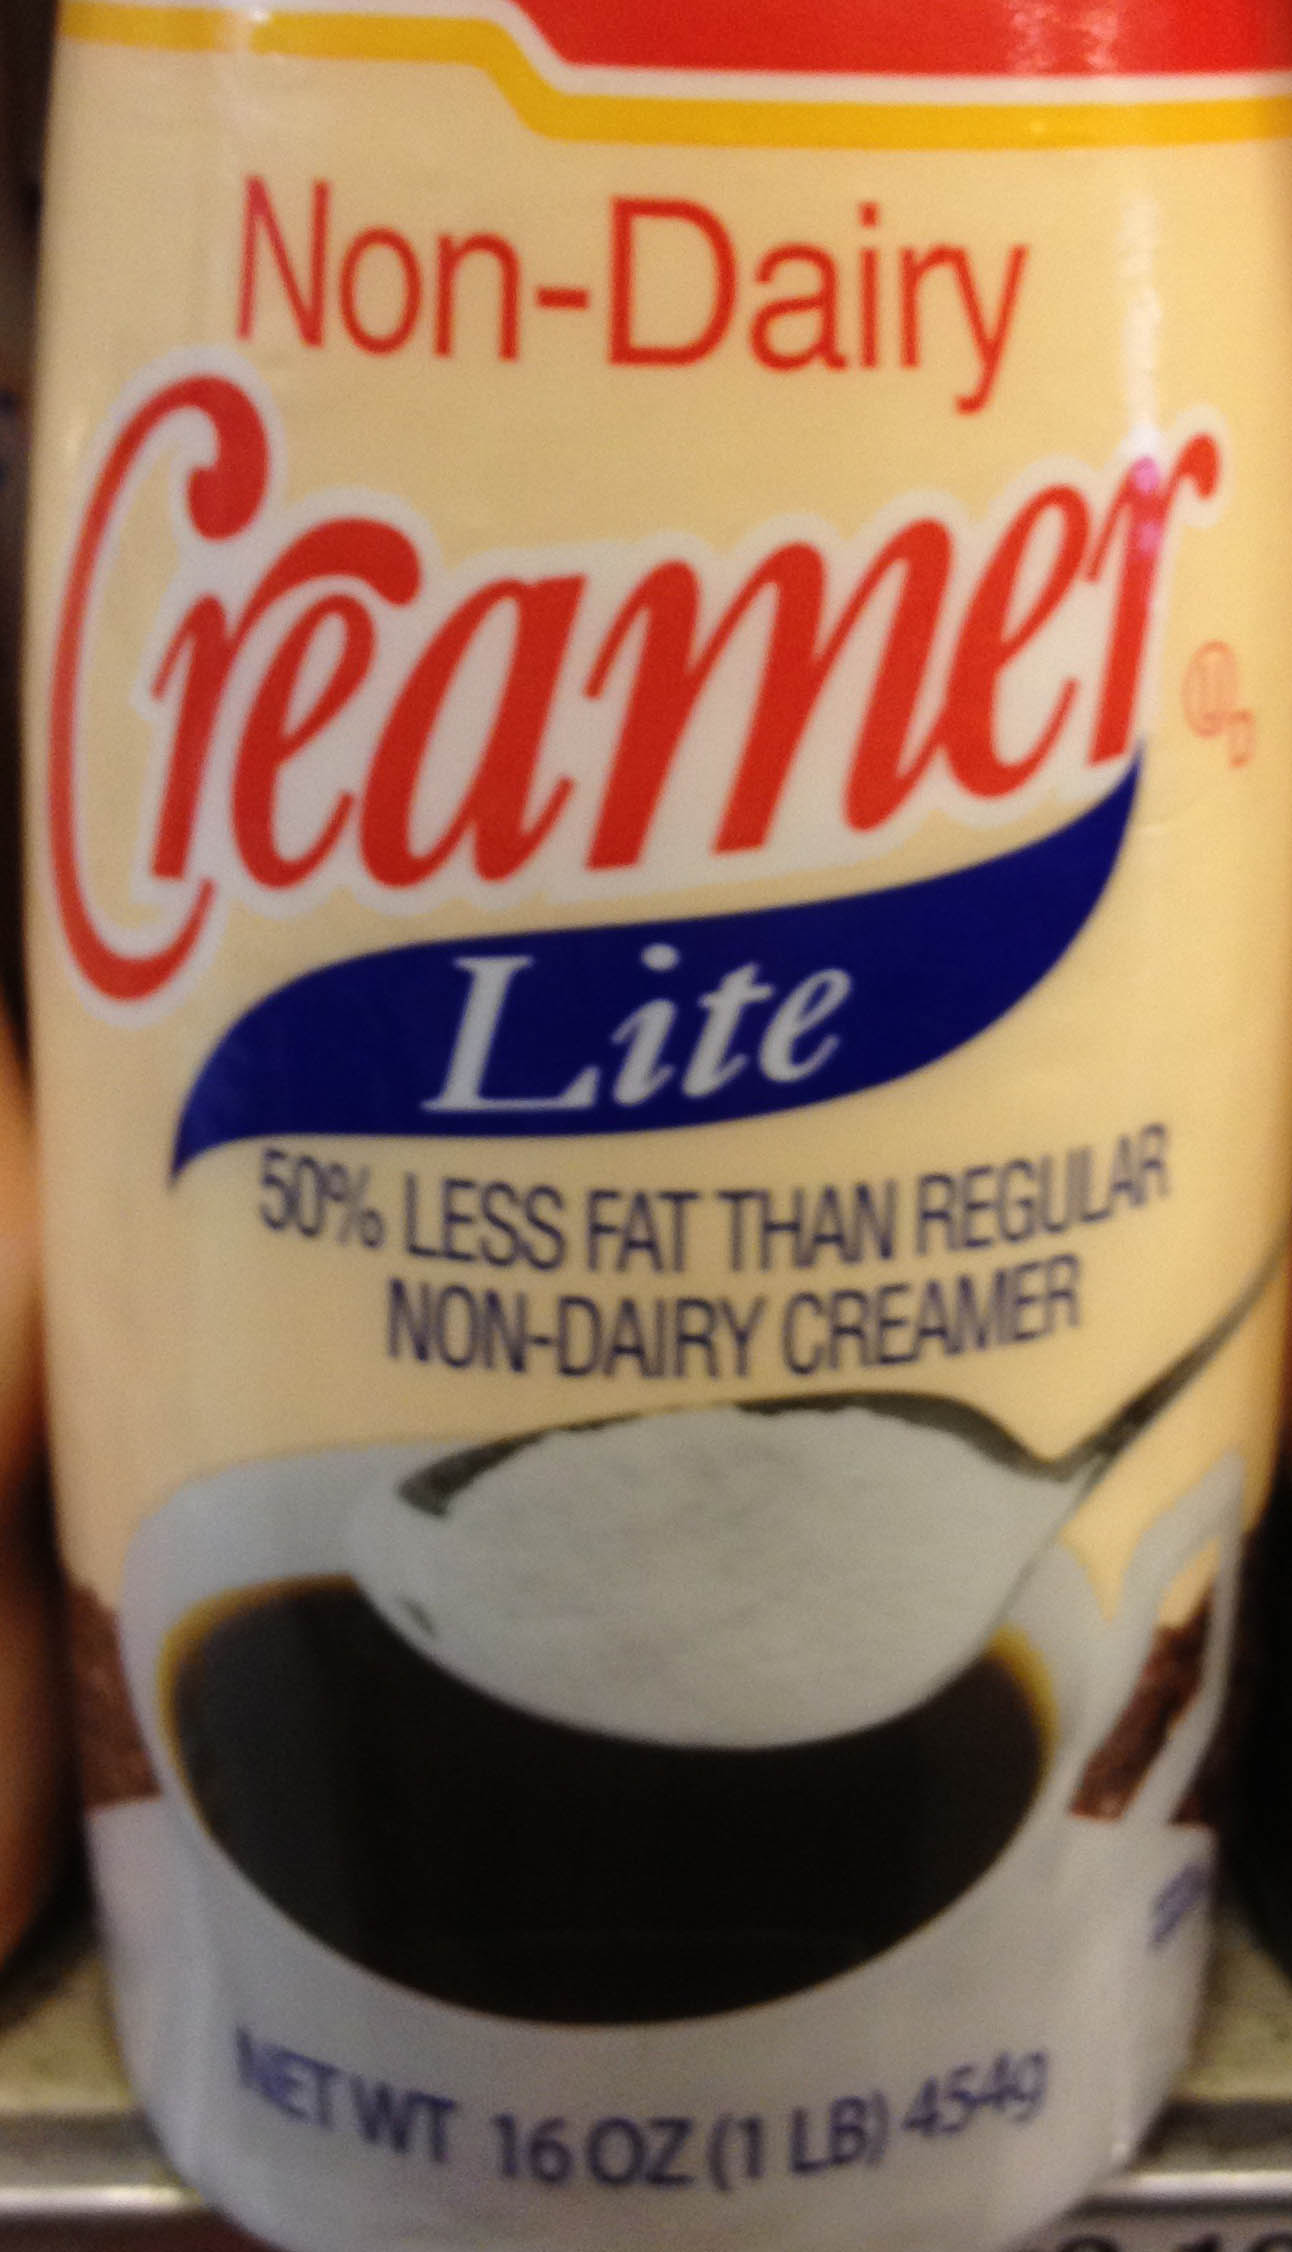 What is nondairy creamer made of?